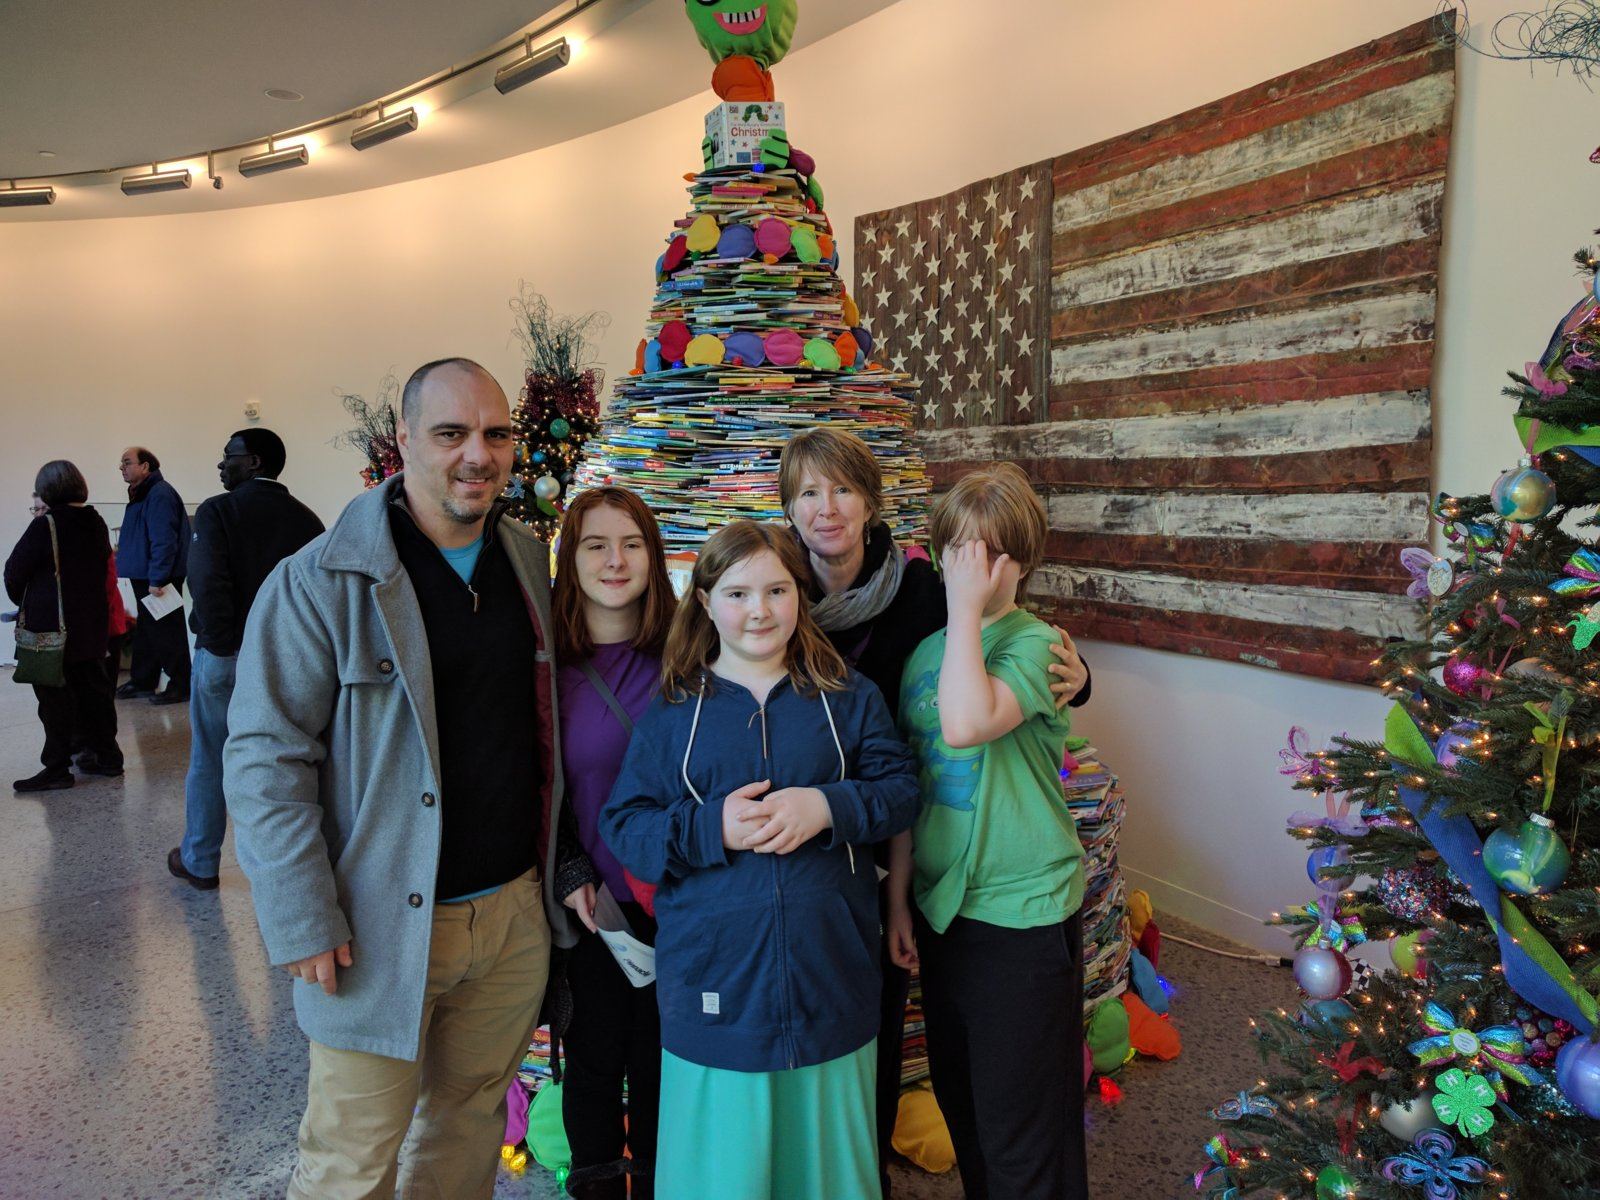 The book tree behind us is a Guinness record attempt for the tree made with the most books. Over 13K.